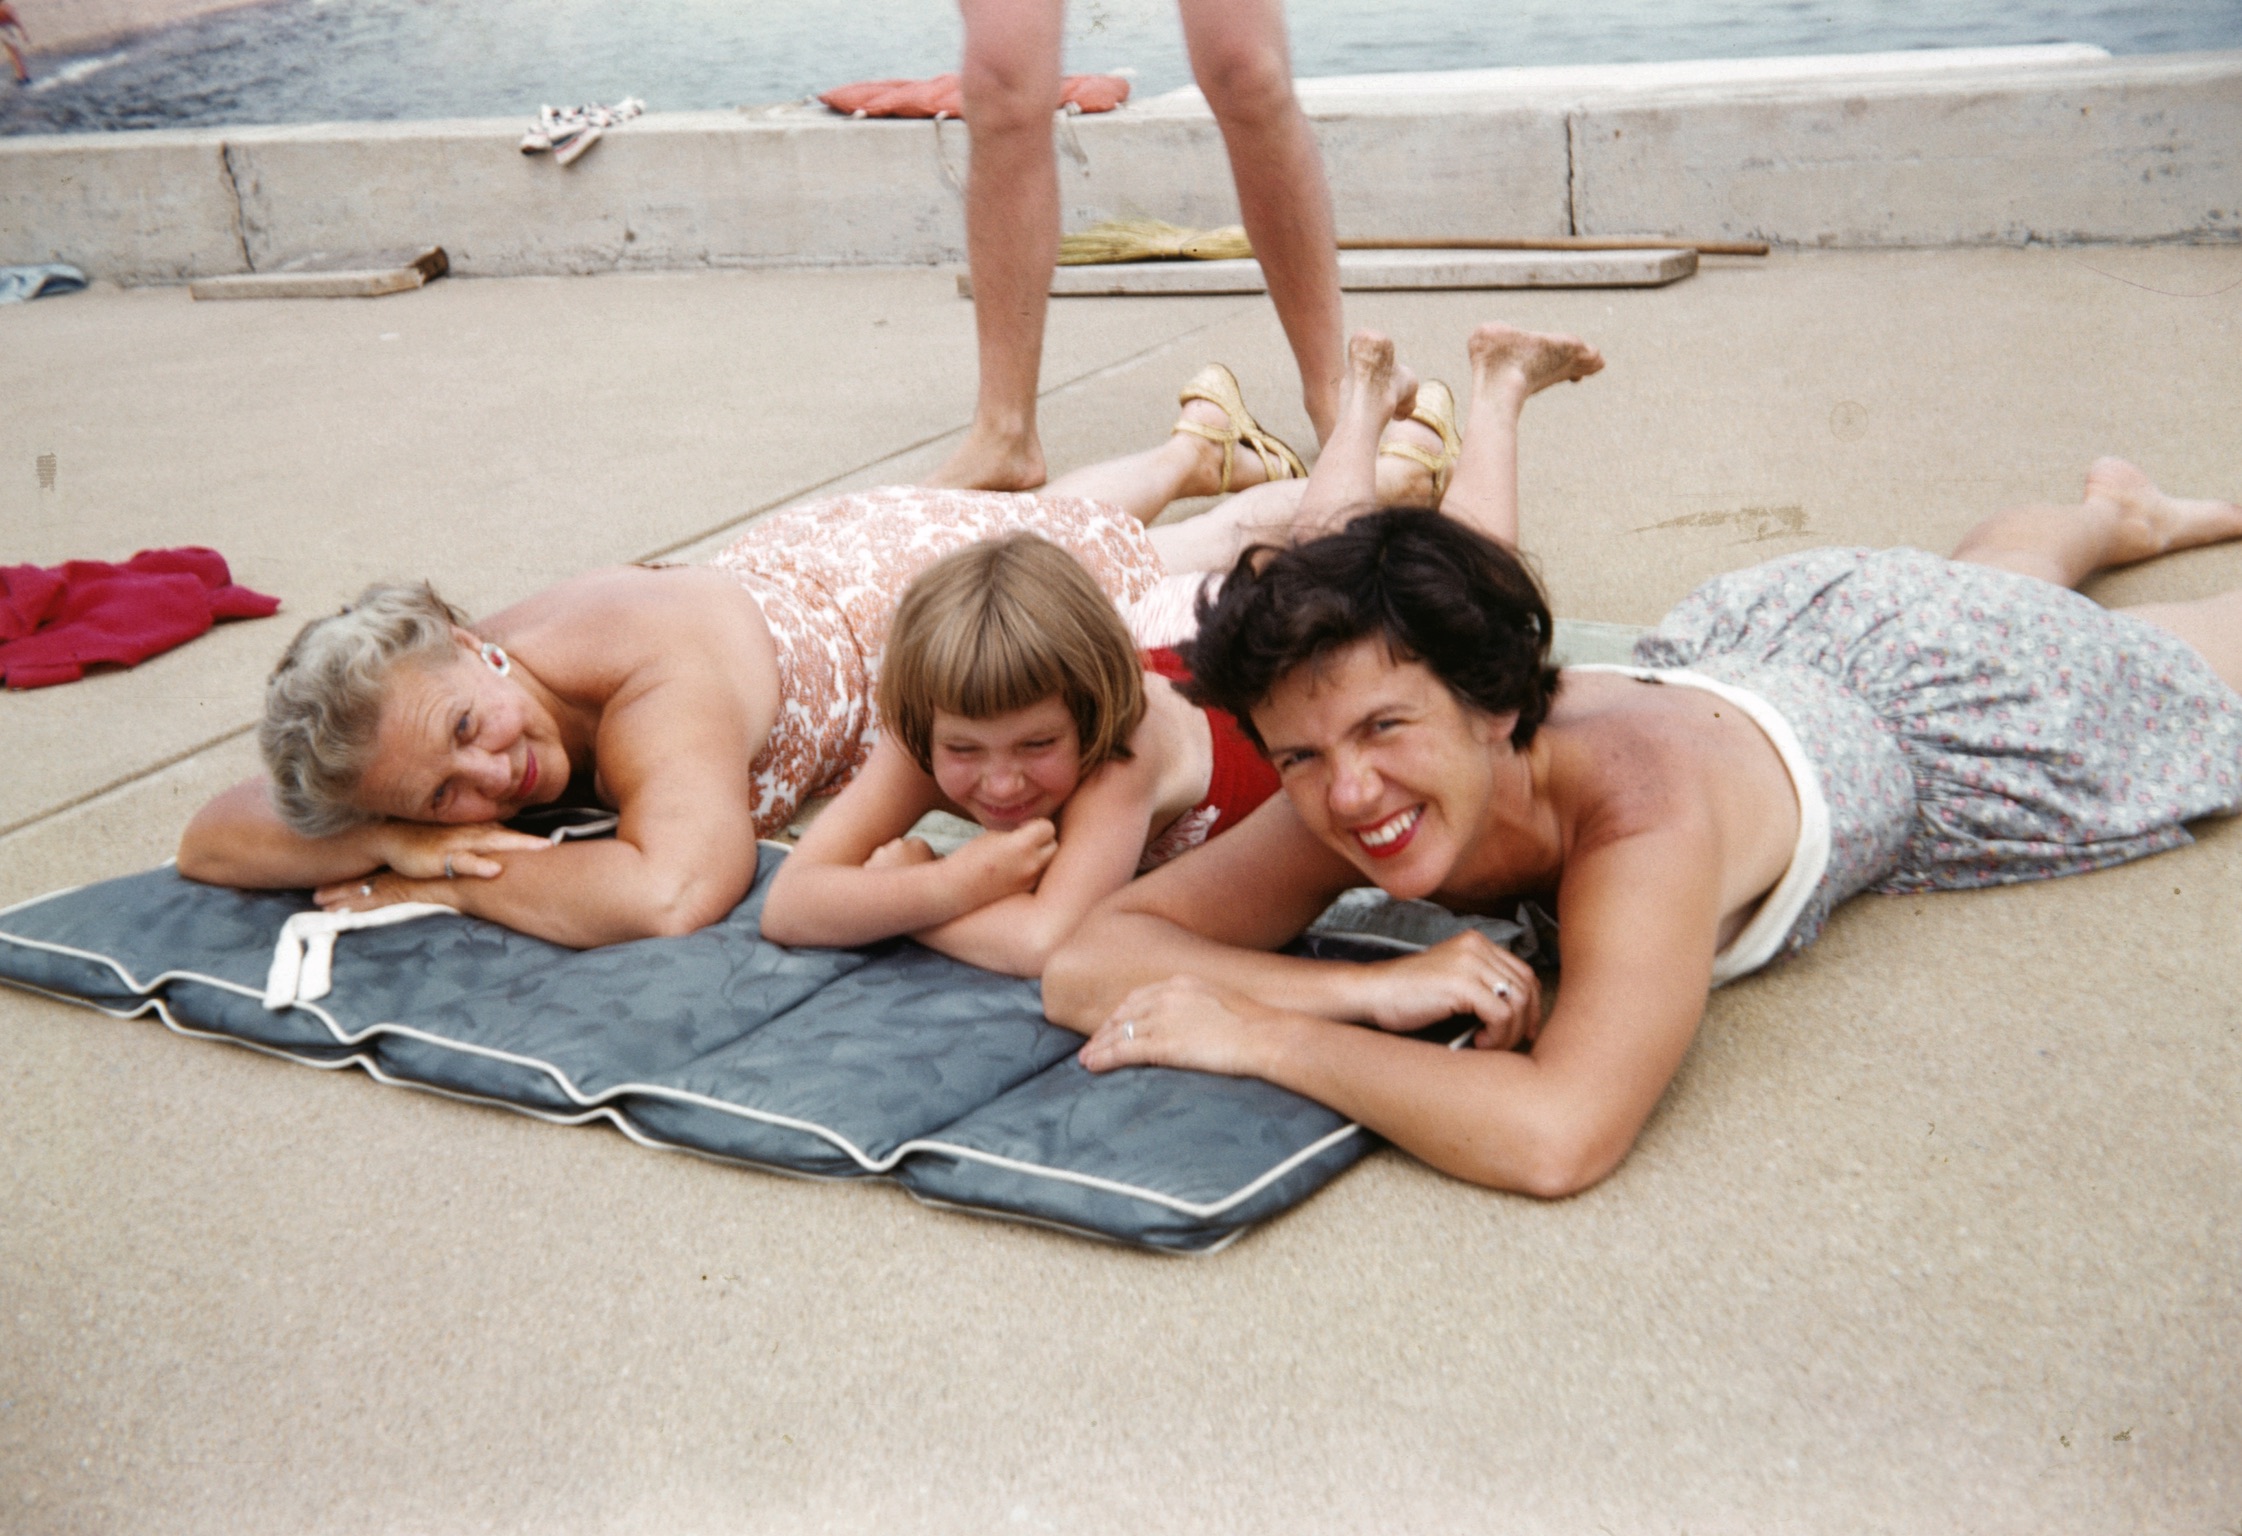 an old photo of two women and a child lying on a beach pad with water behind them